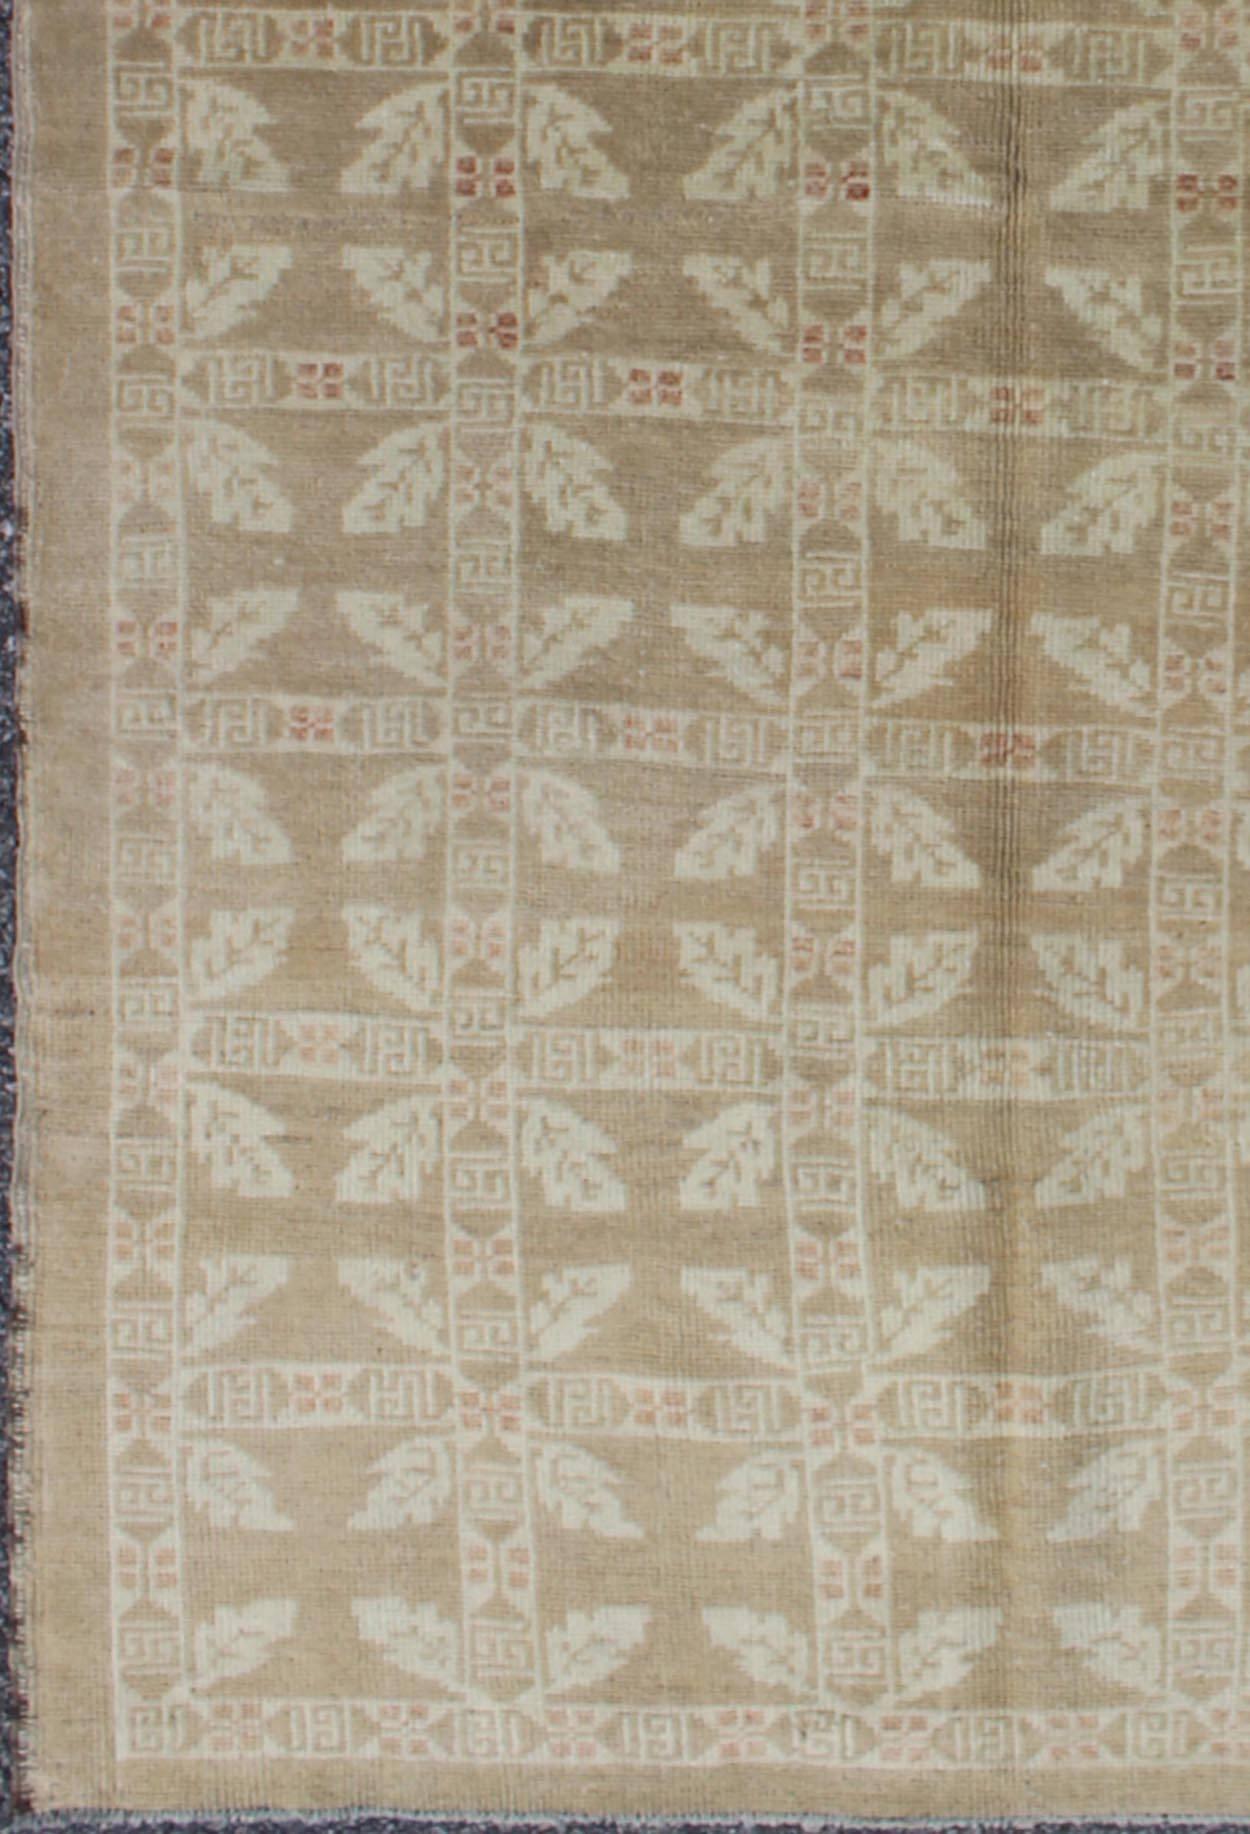 All-over ivory wreath design vintage Turkish Oushak rug in taupe and neutrals, rug en-603, country of origin / type: Turkey / Oushak, circa mid-20th century.

This vintage Turkish Oushak carpet (circa mid-20th century) features an all-over pattern